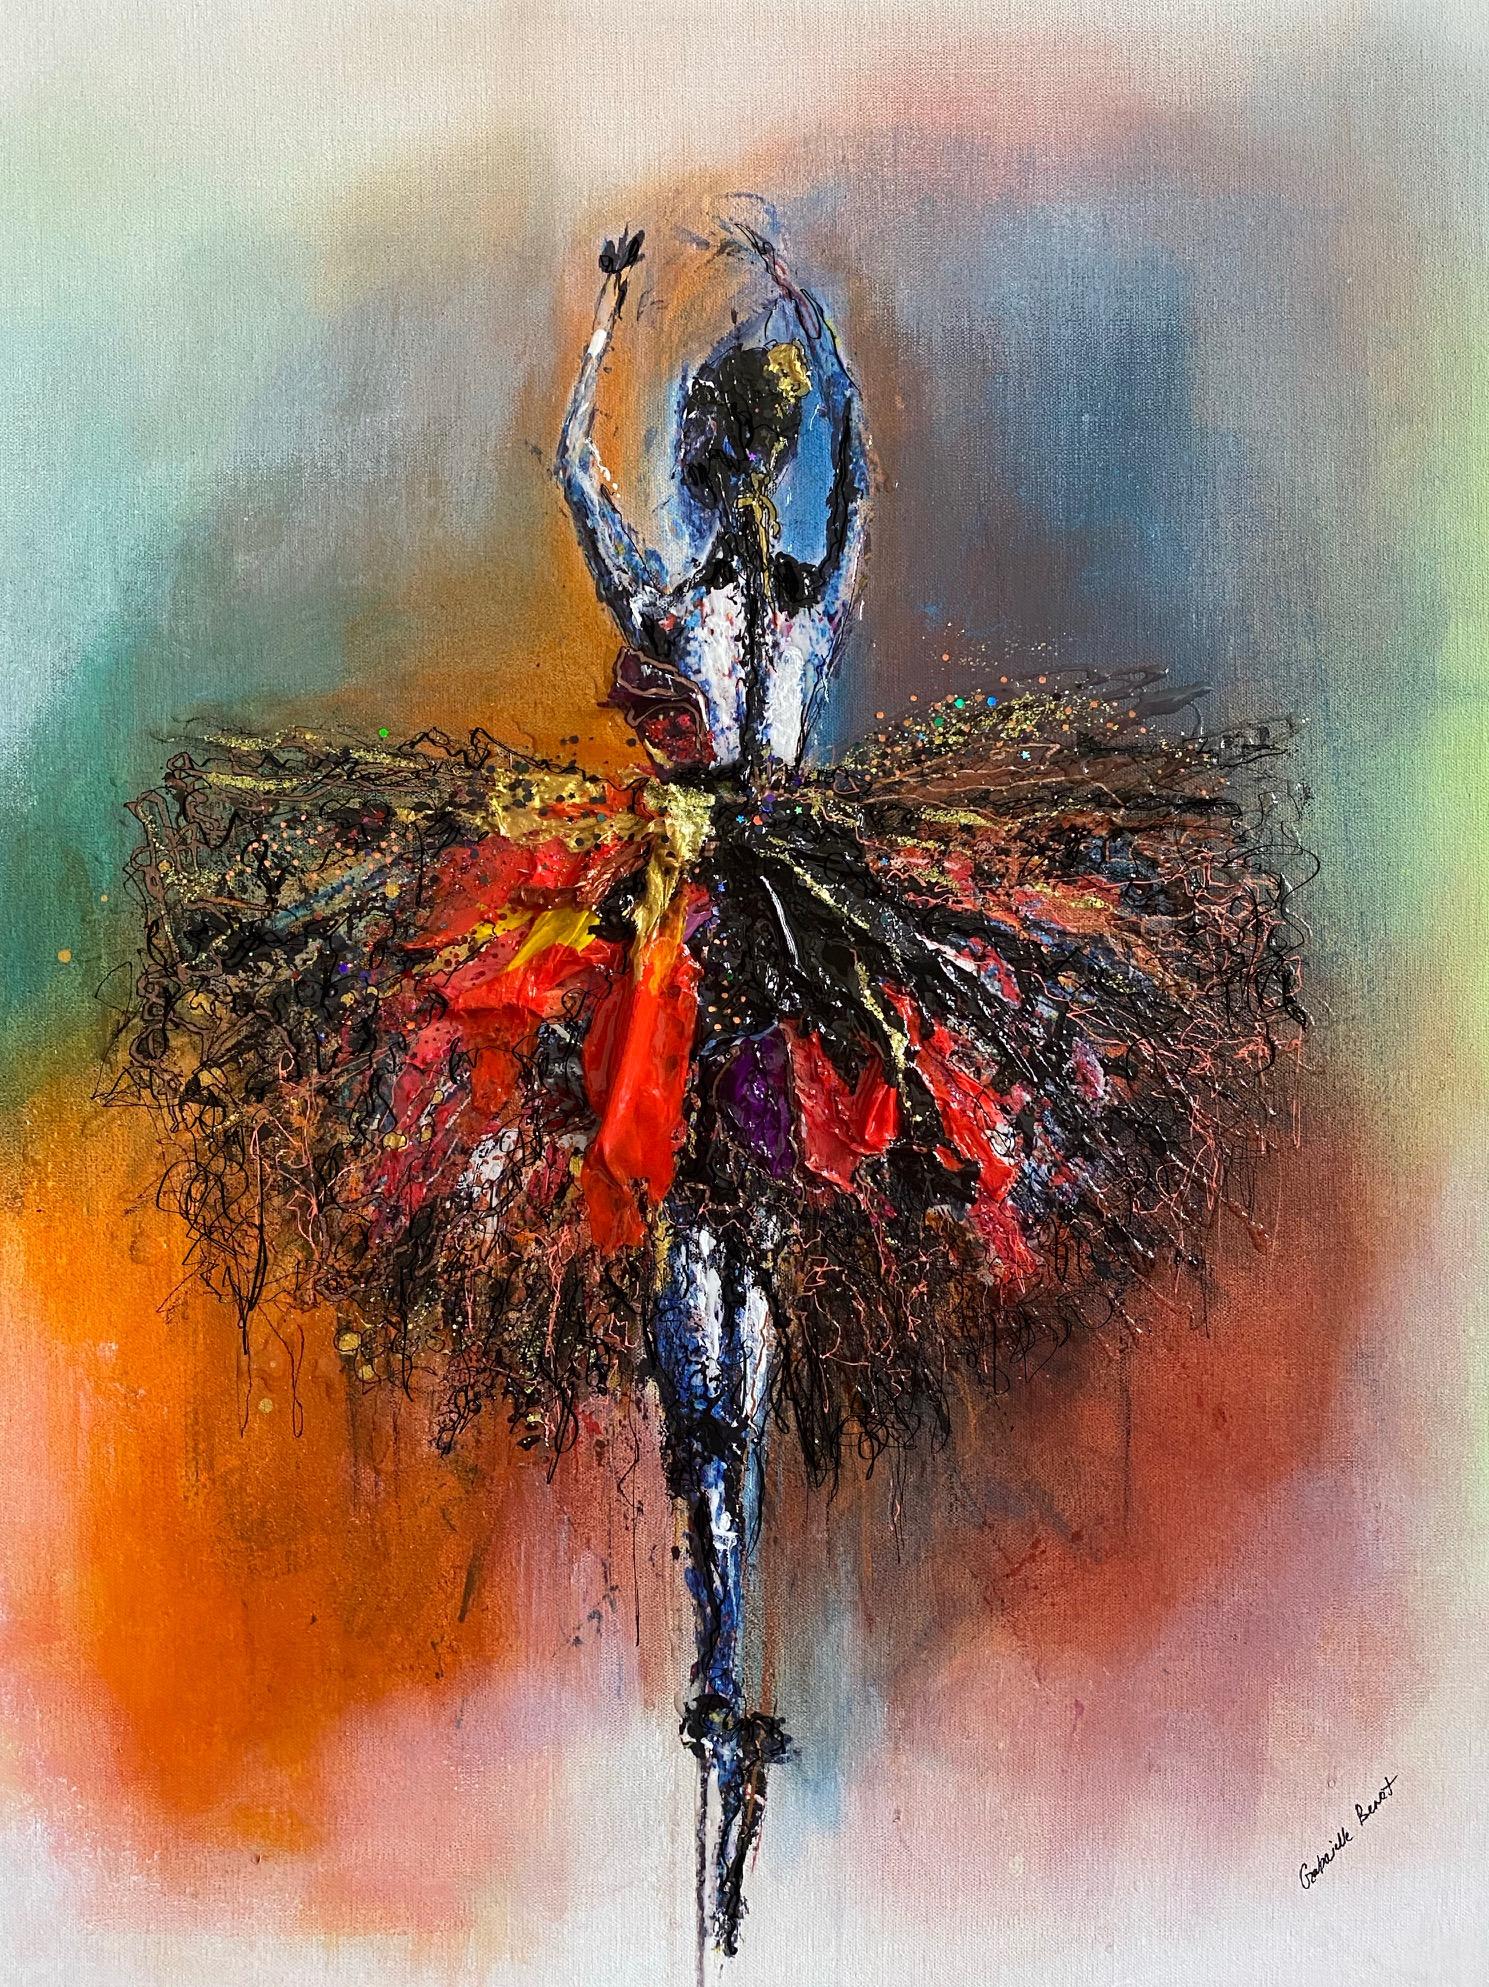 Gabrielle Benot - Gabrielle Benot, "Midnight", Dark Abstract Ballet Painting  on Canvas, 2020 For Sale at 1stDibs